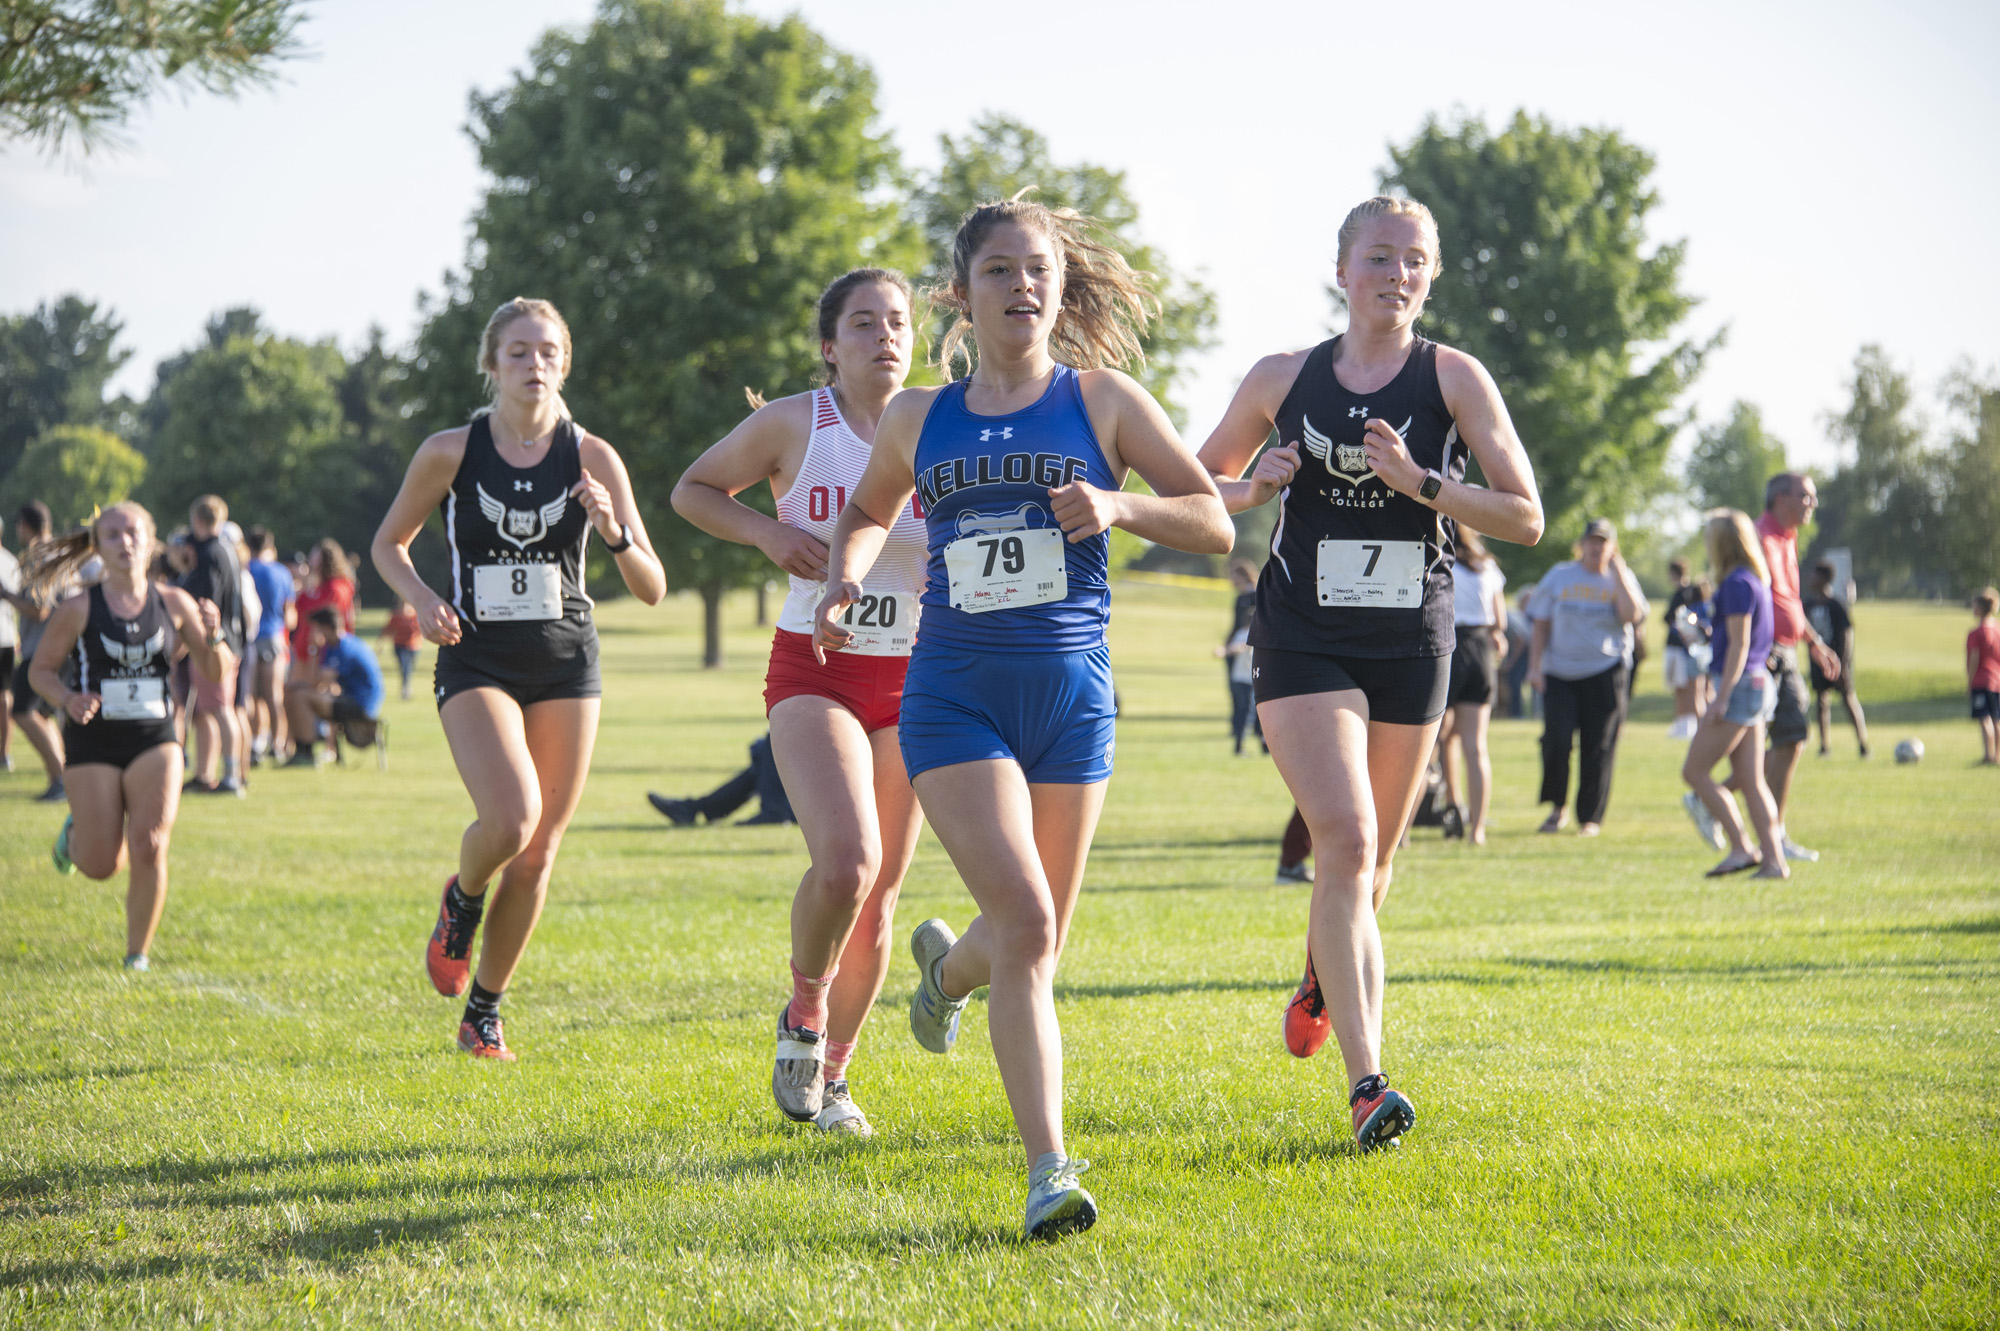 Runners run at the Comet Open 5K on Sept. 1, 2021.